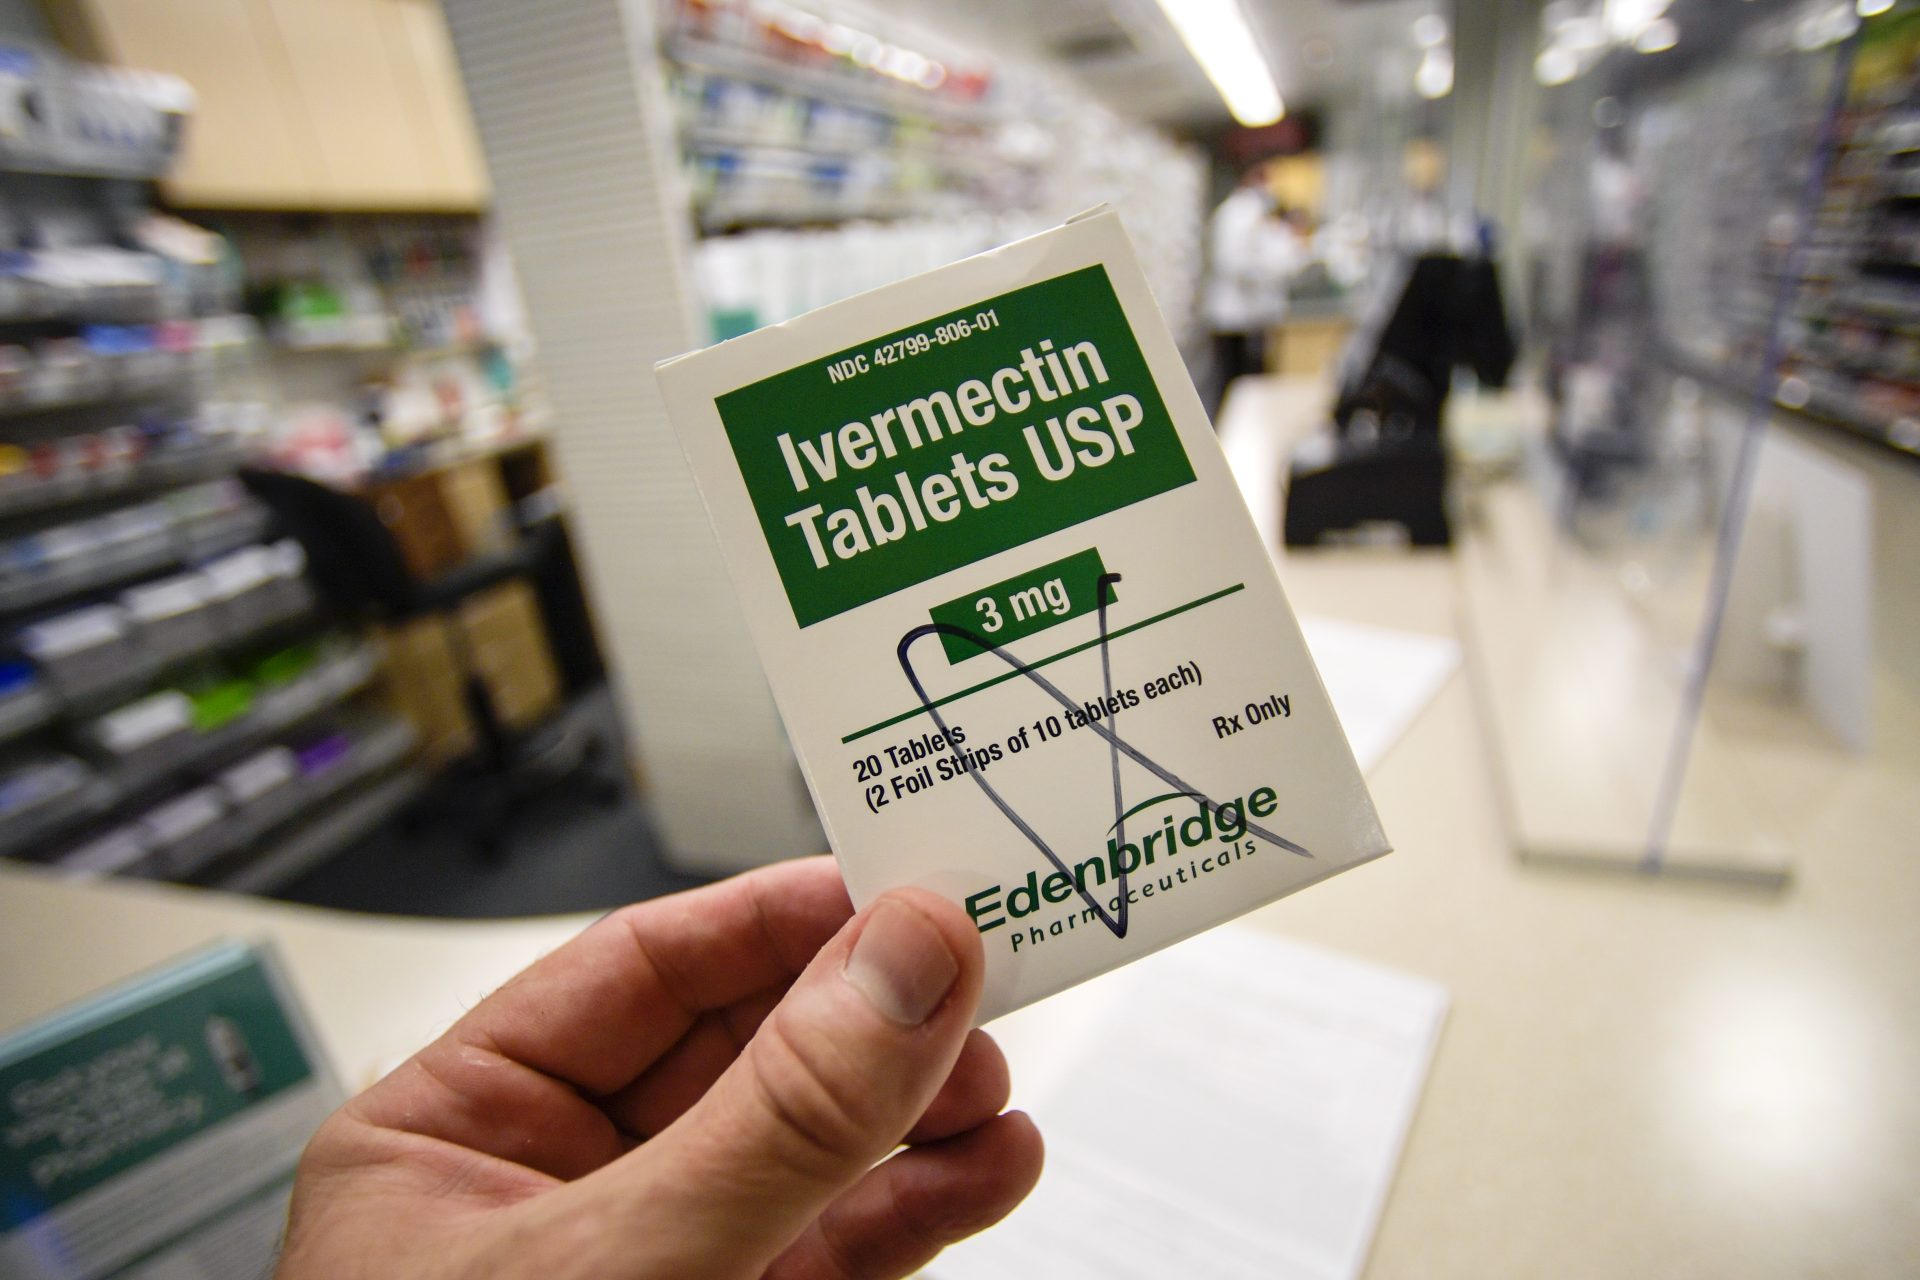 A box of ivermectin is shown in a pharmacy as pharmacists work in the background, Thursday, Sept. 9, 2021, in Ga.